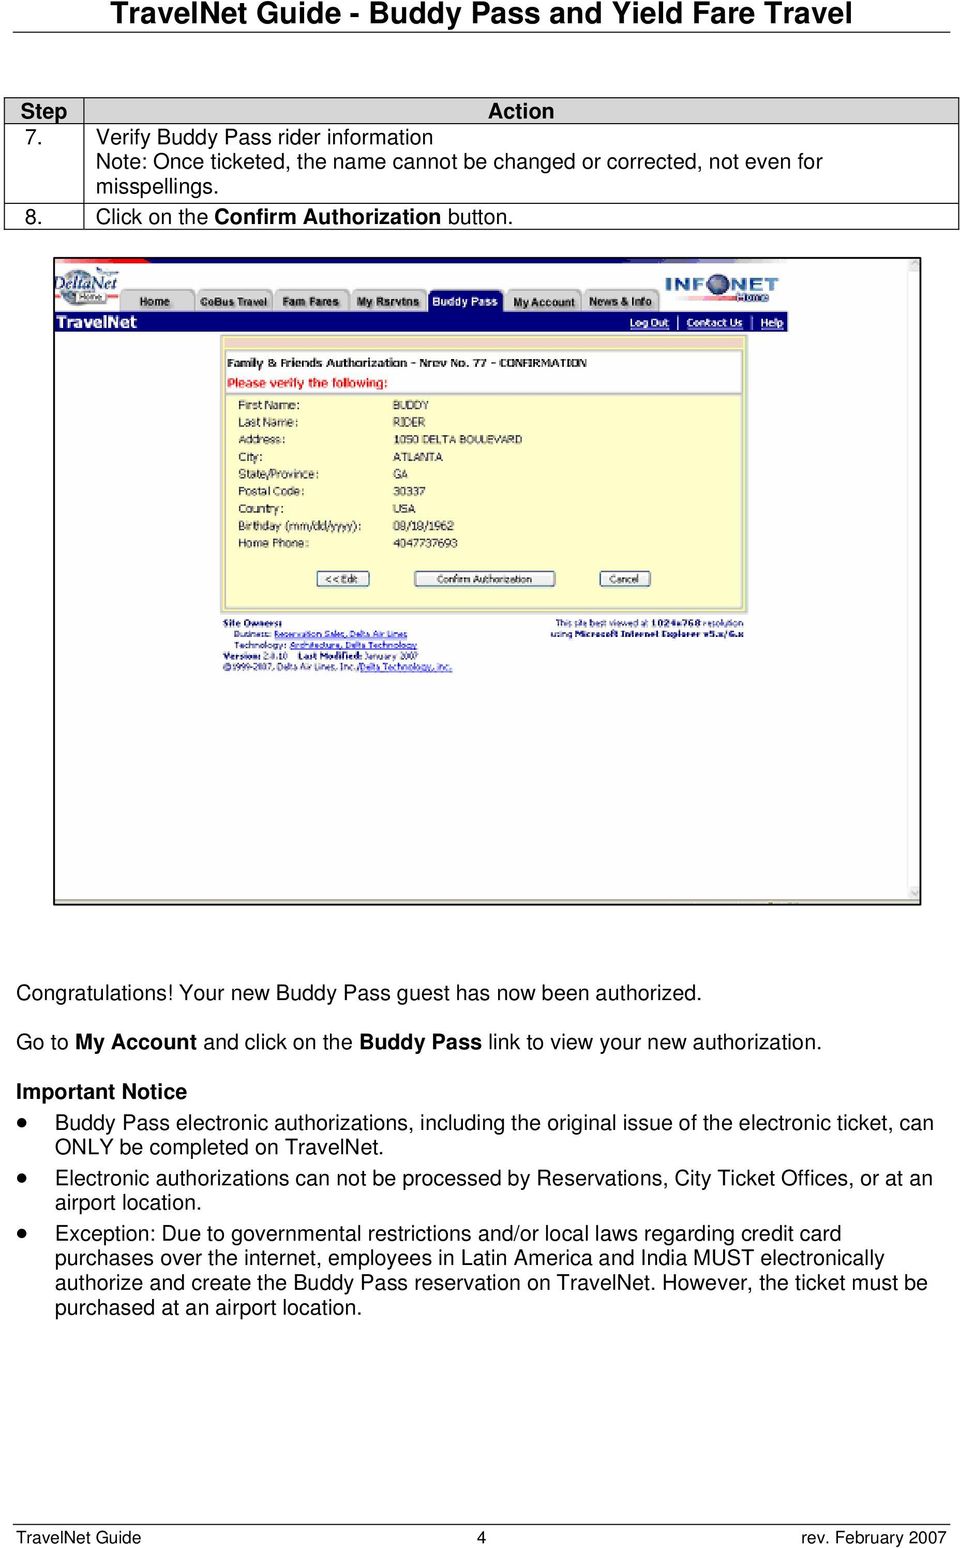 Important Notice Buddy Pass electronic authorizations, including the original issue of the electronic ticket, can ONLY be completed on TravelNet.